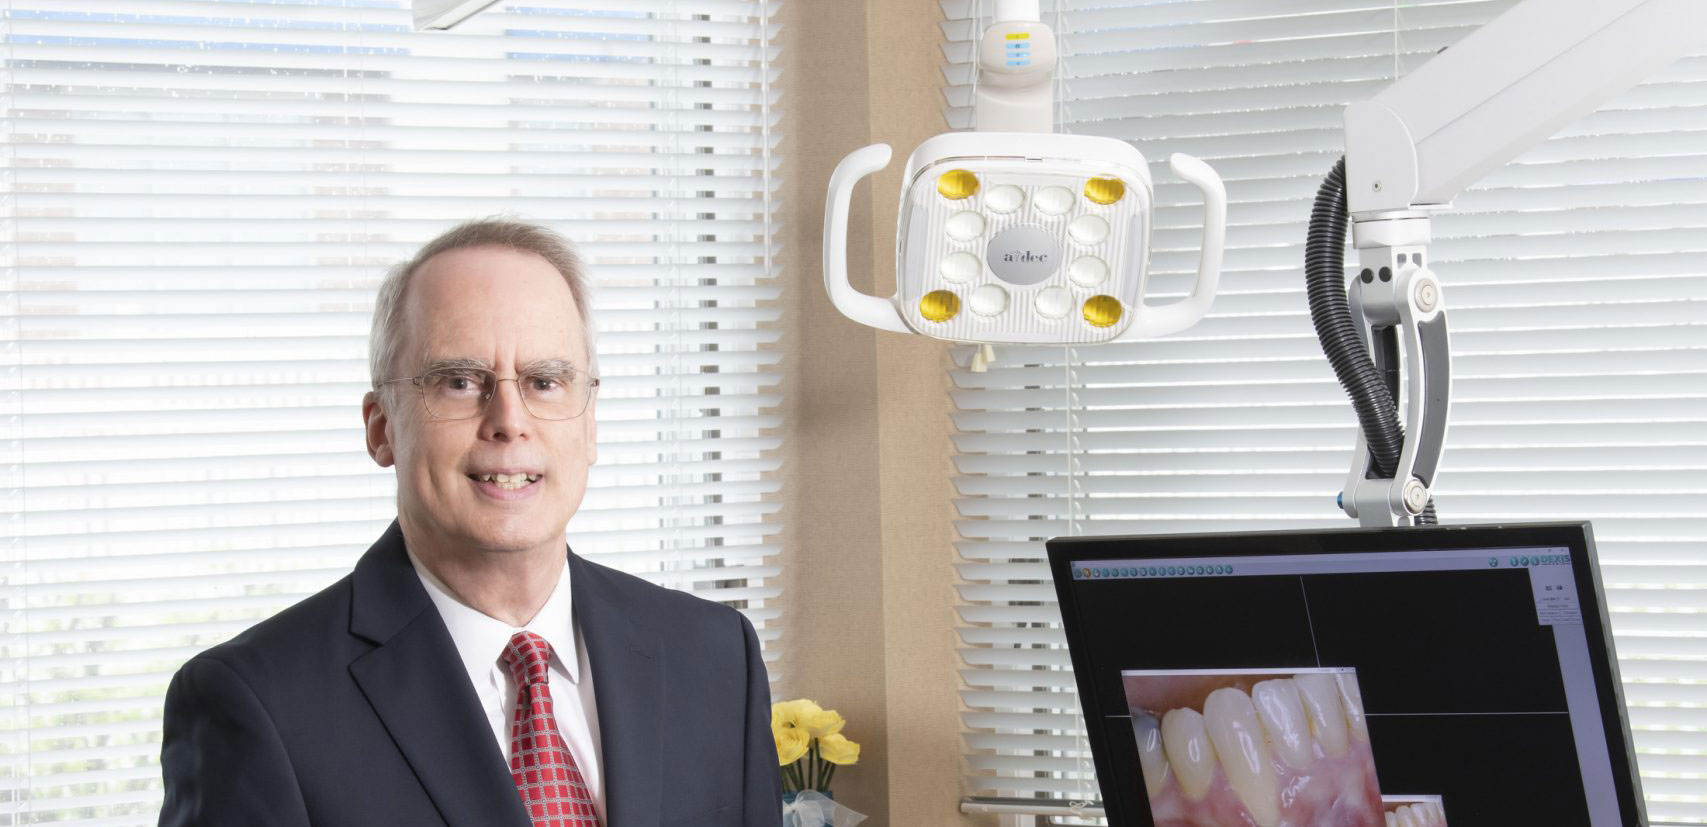 Wohl and Trail Periodontics and Dental Implants